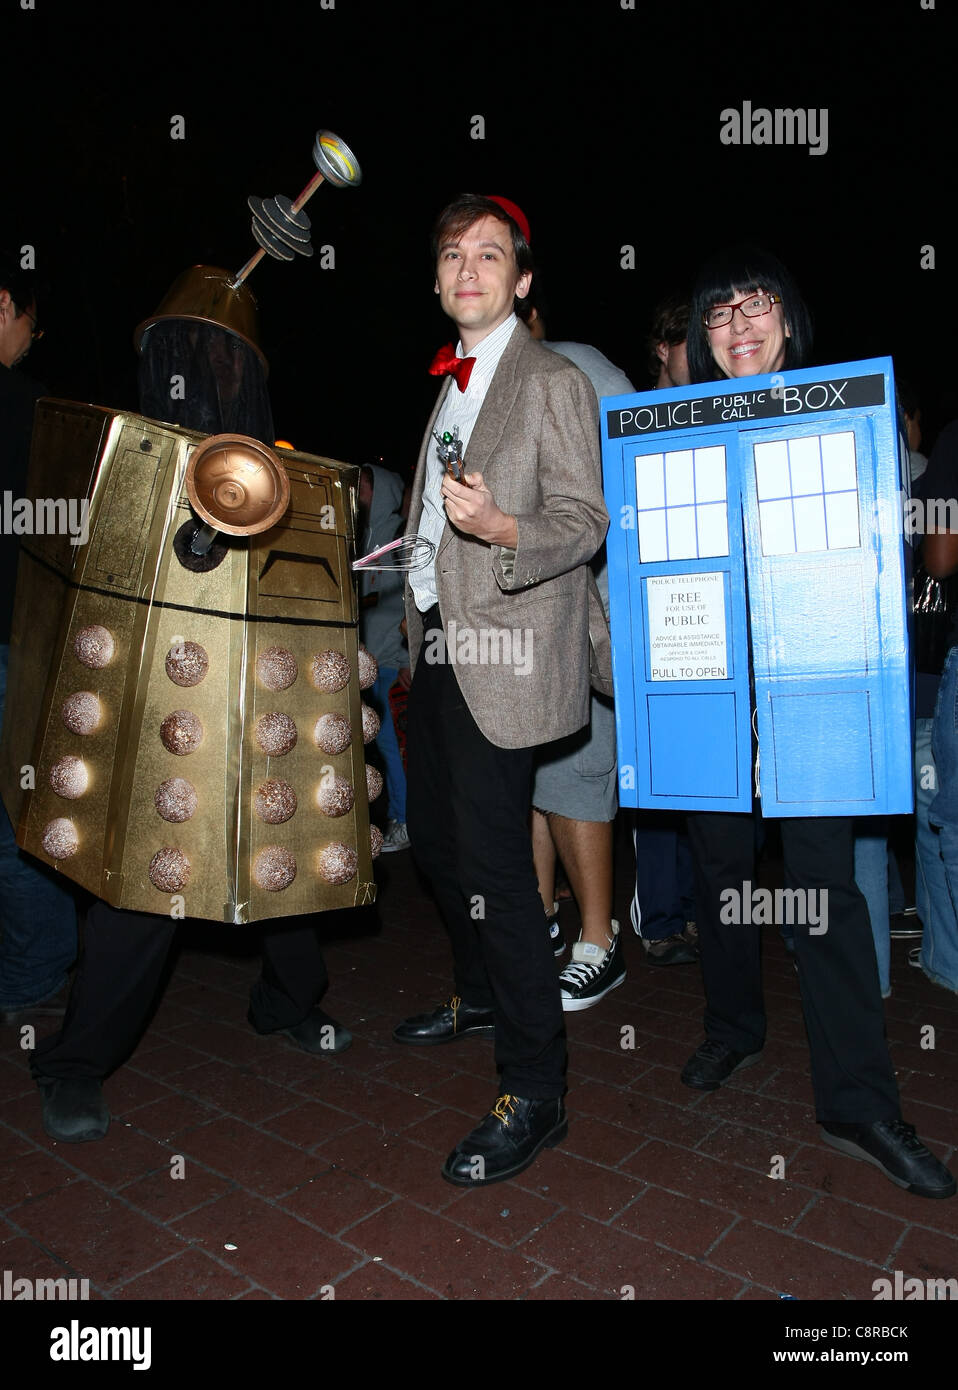 DALEK & DR. WHO & TARDIS COSTUMES 2011 WEST HOLLYWOOD COSTUME CARNAVAL LOS ANGELES CALIFORNIA USA 31 October 2011 Stock Photo